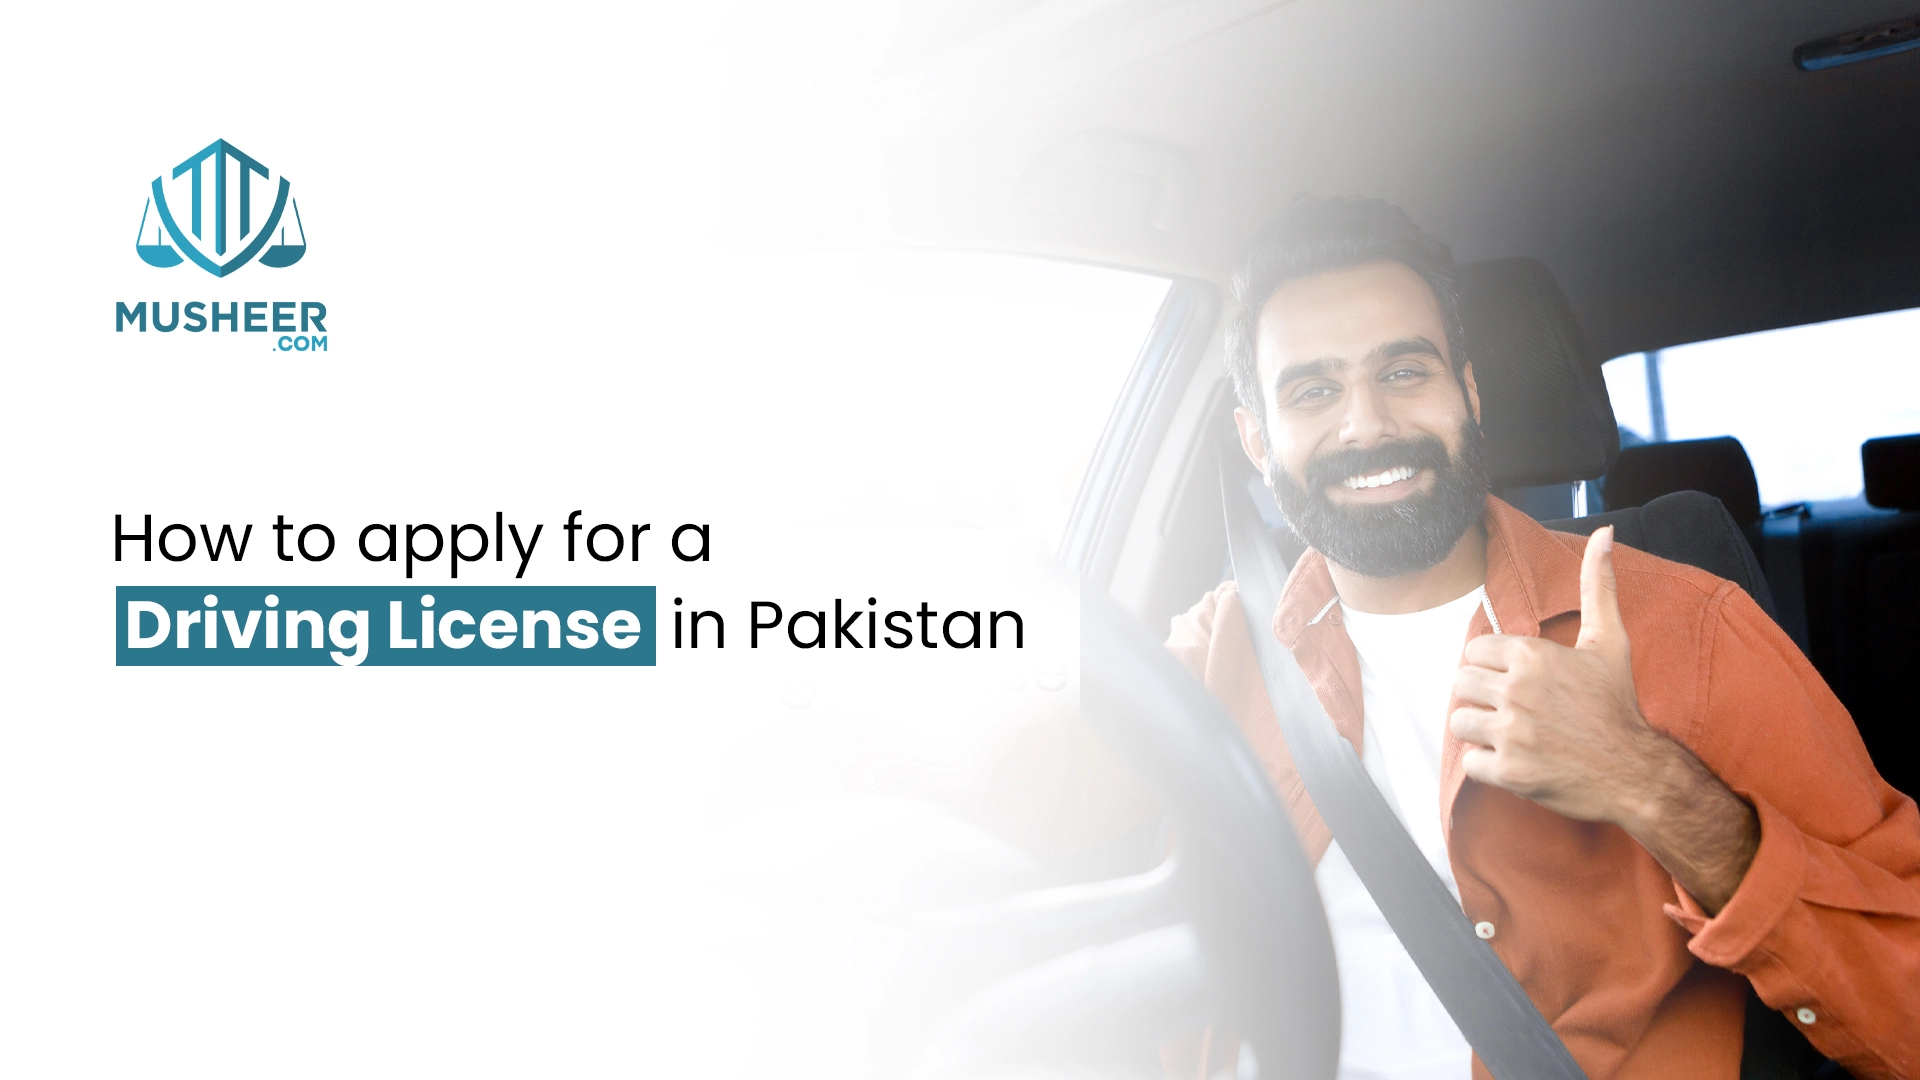 How To Apply For A Driving License Online In Pakistan